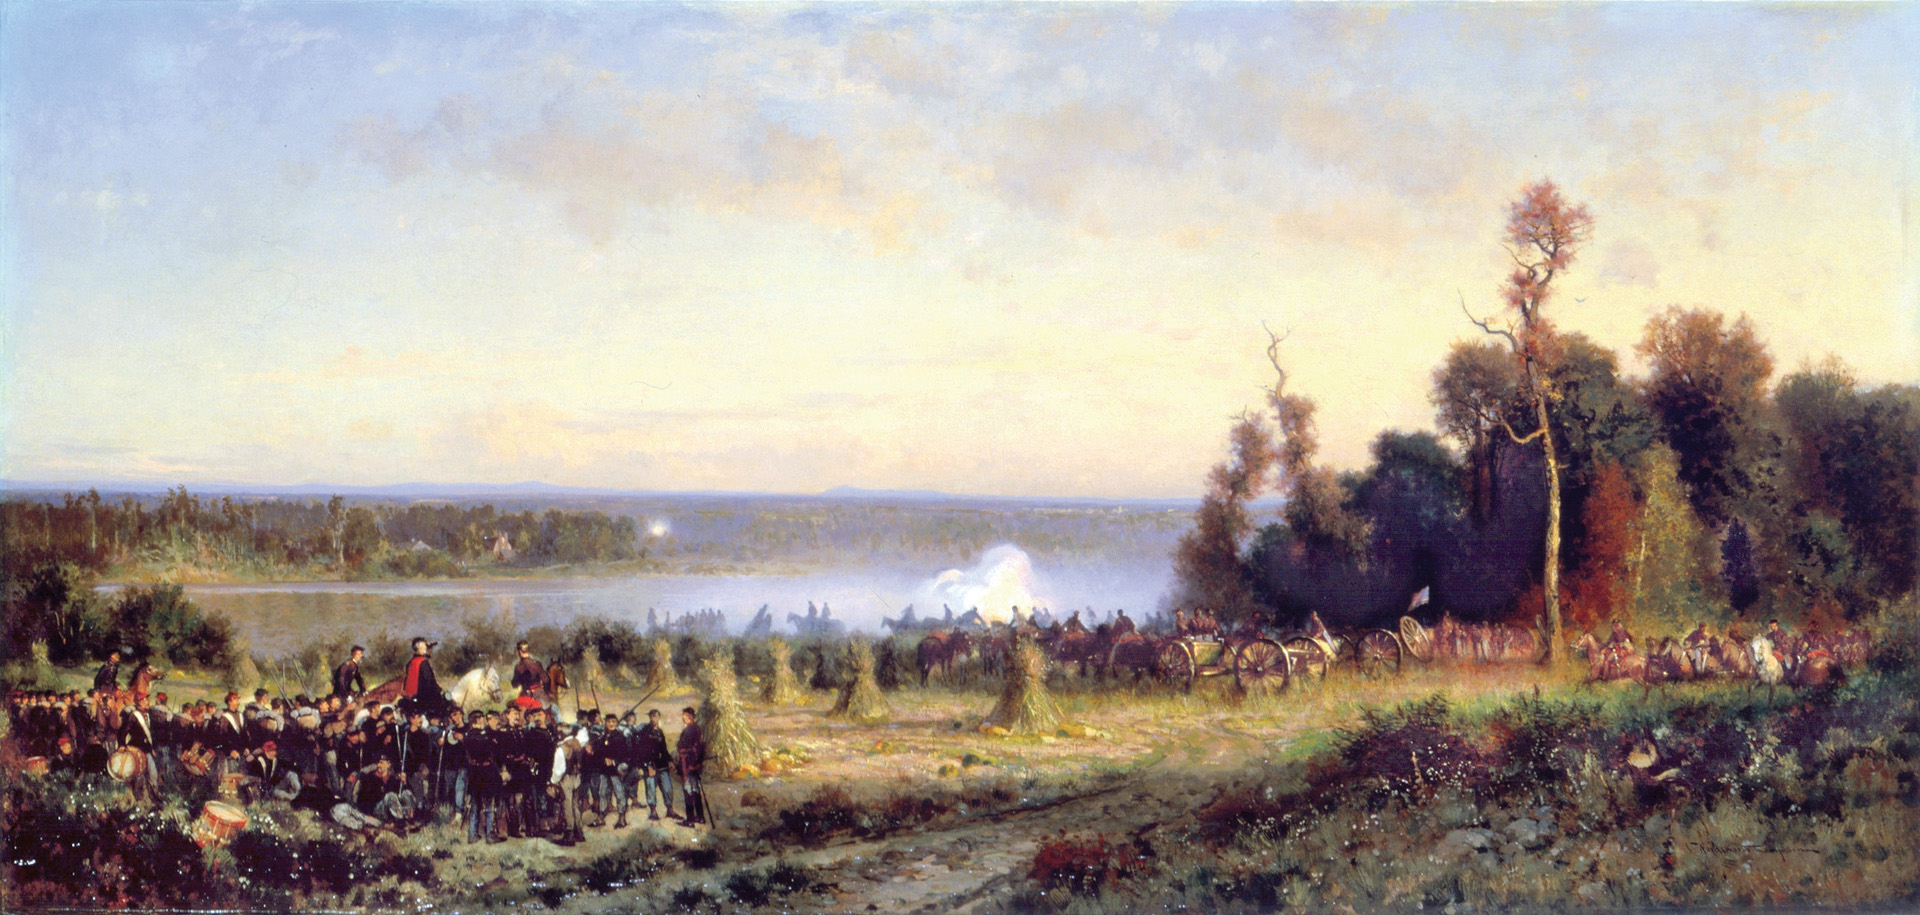 A Union battery on the Maryland side of the Potomac shells Confederate pickets on the Virginia side in a period painting by Alfred Thompson. Brig. Gen. Charles Stone sent part of his division upriver to cross at Harrison’s Island to turn the Confederate flank, while another portion demonstrated at Edwards Ferry.